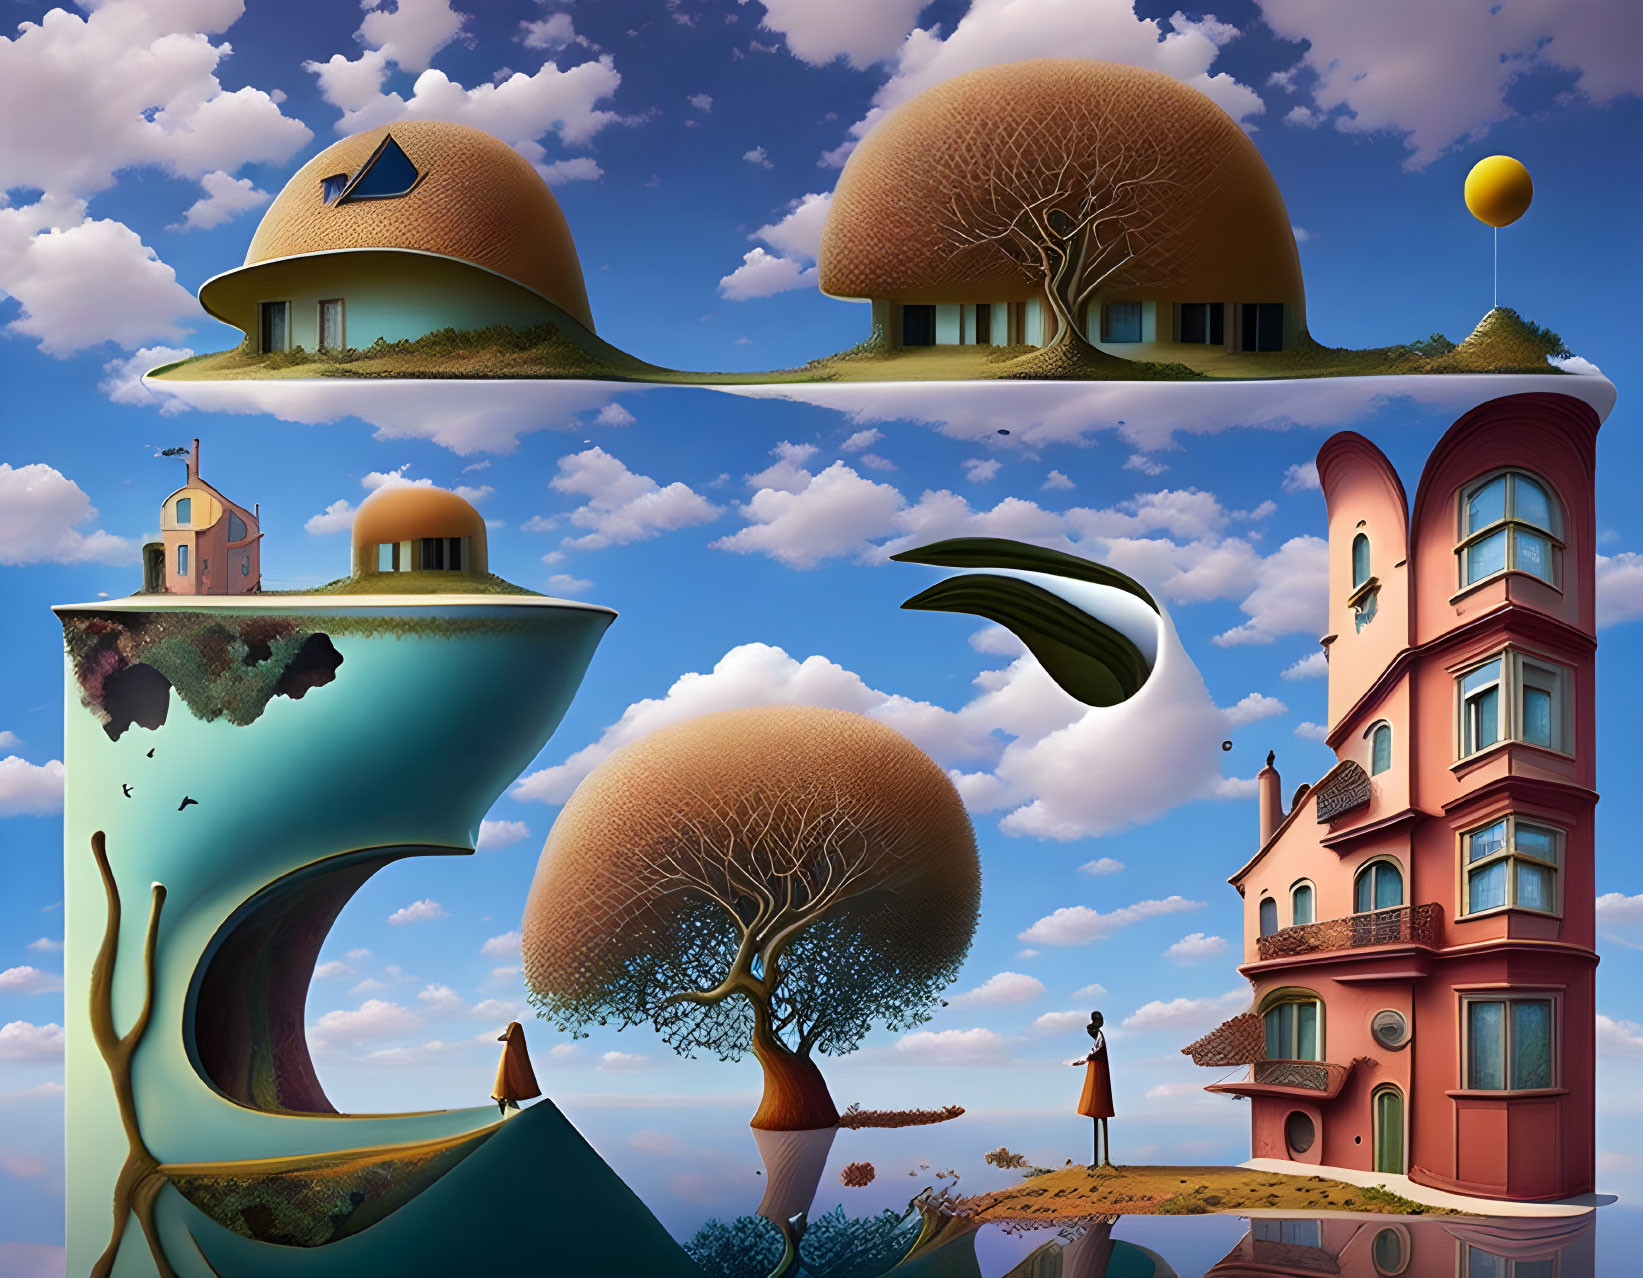 Whimsical floating islands with unique houses and lone figure by waterfall